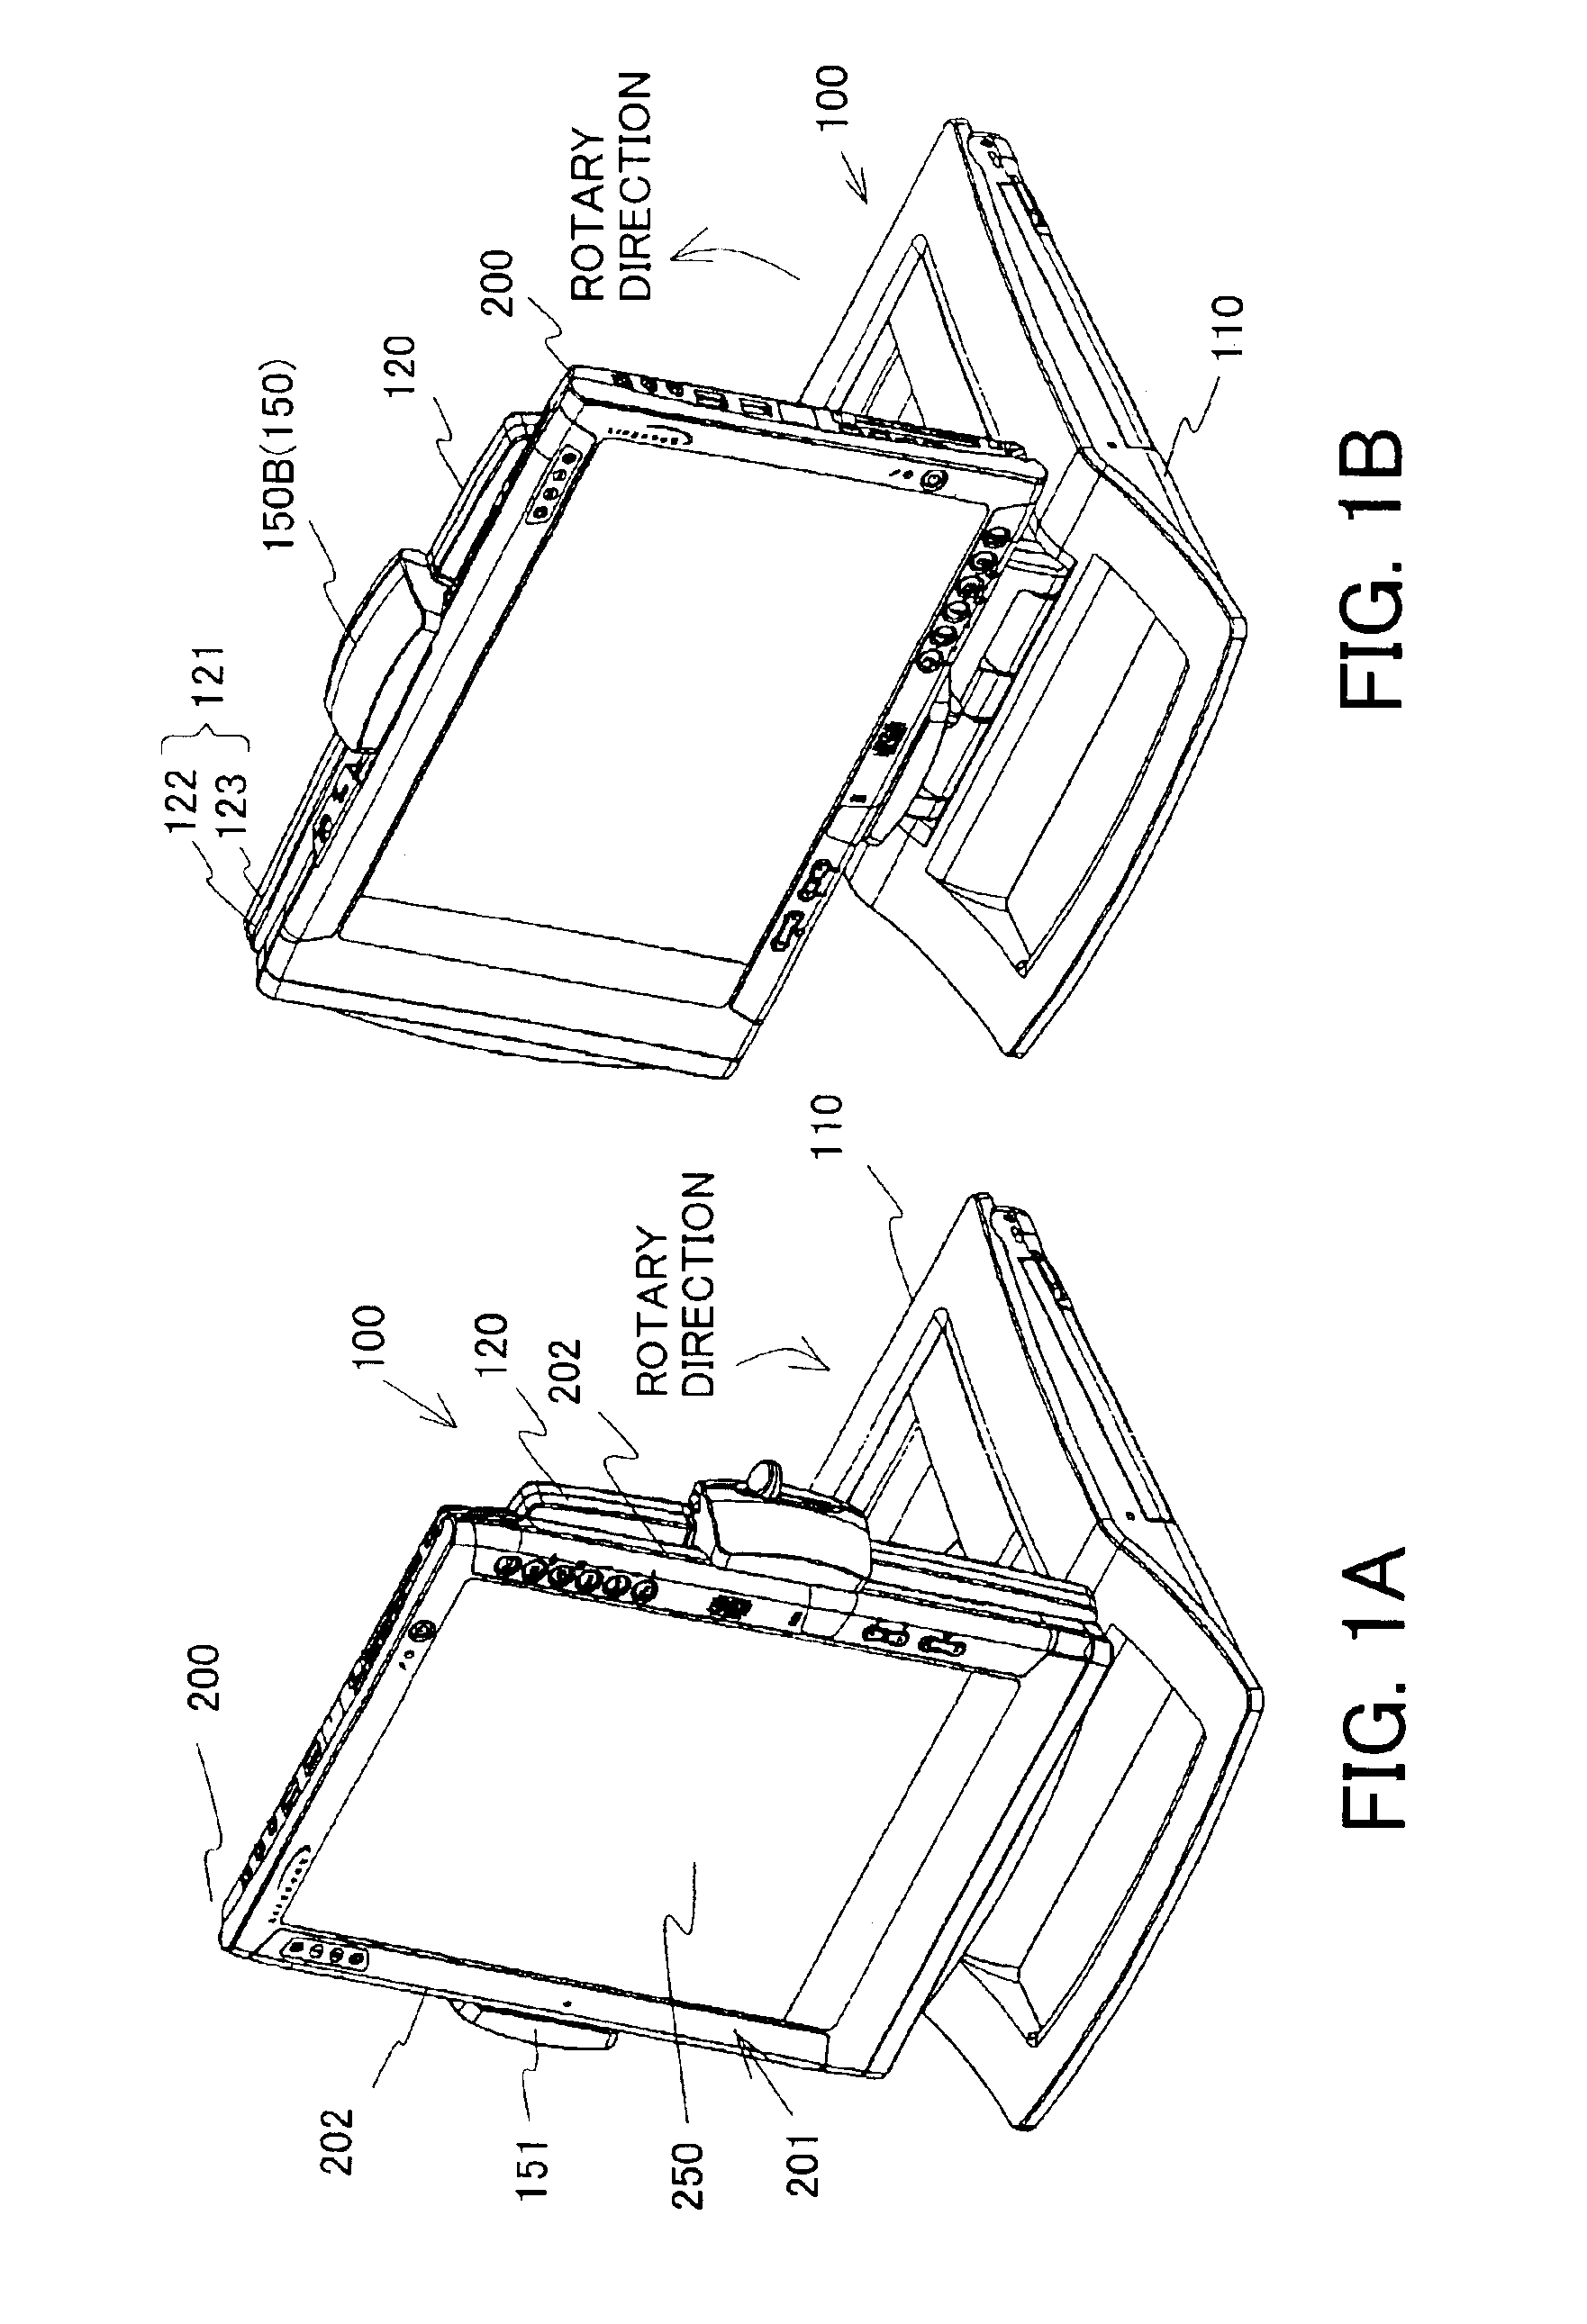 Functional expansion apparatus and method for attaching electronic apparatus to the functional expansion apparatus